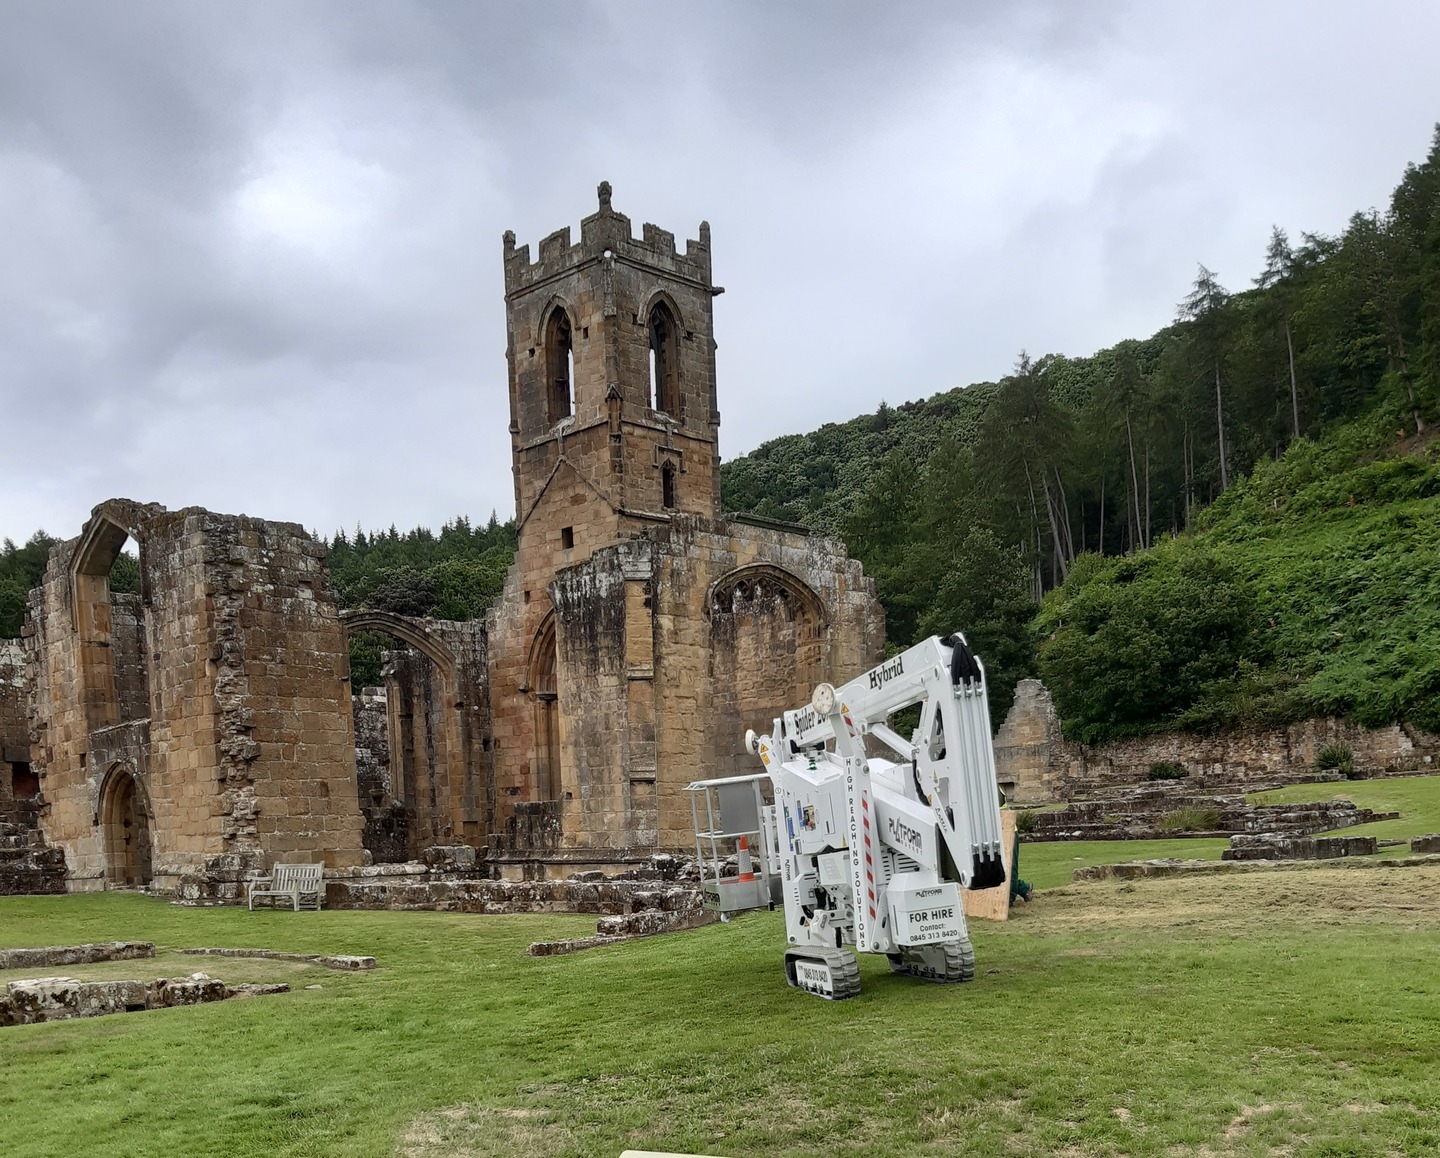 Lottie, High Reaching Solutions 20m Lithium hybrid tracked spiderlift leaving a ruined abbey after assisting with a stone survey near Northallerton, North Yorkshire.